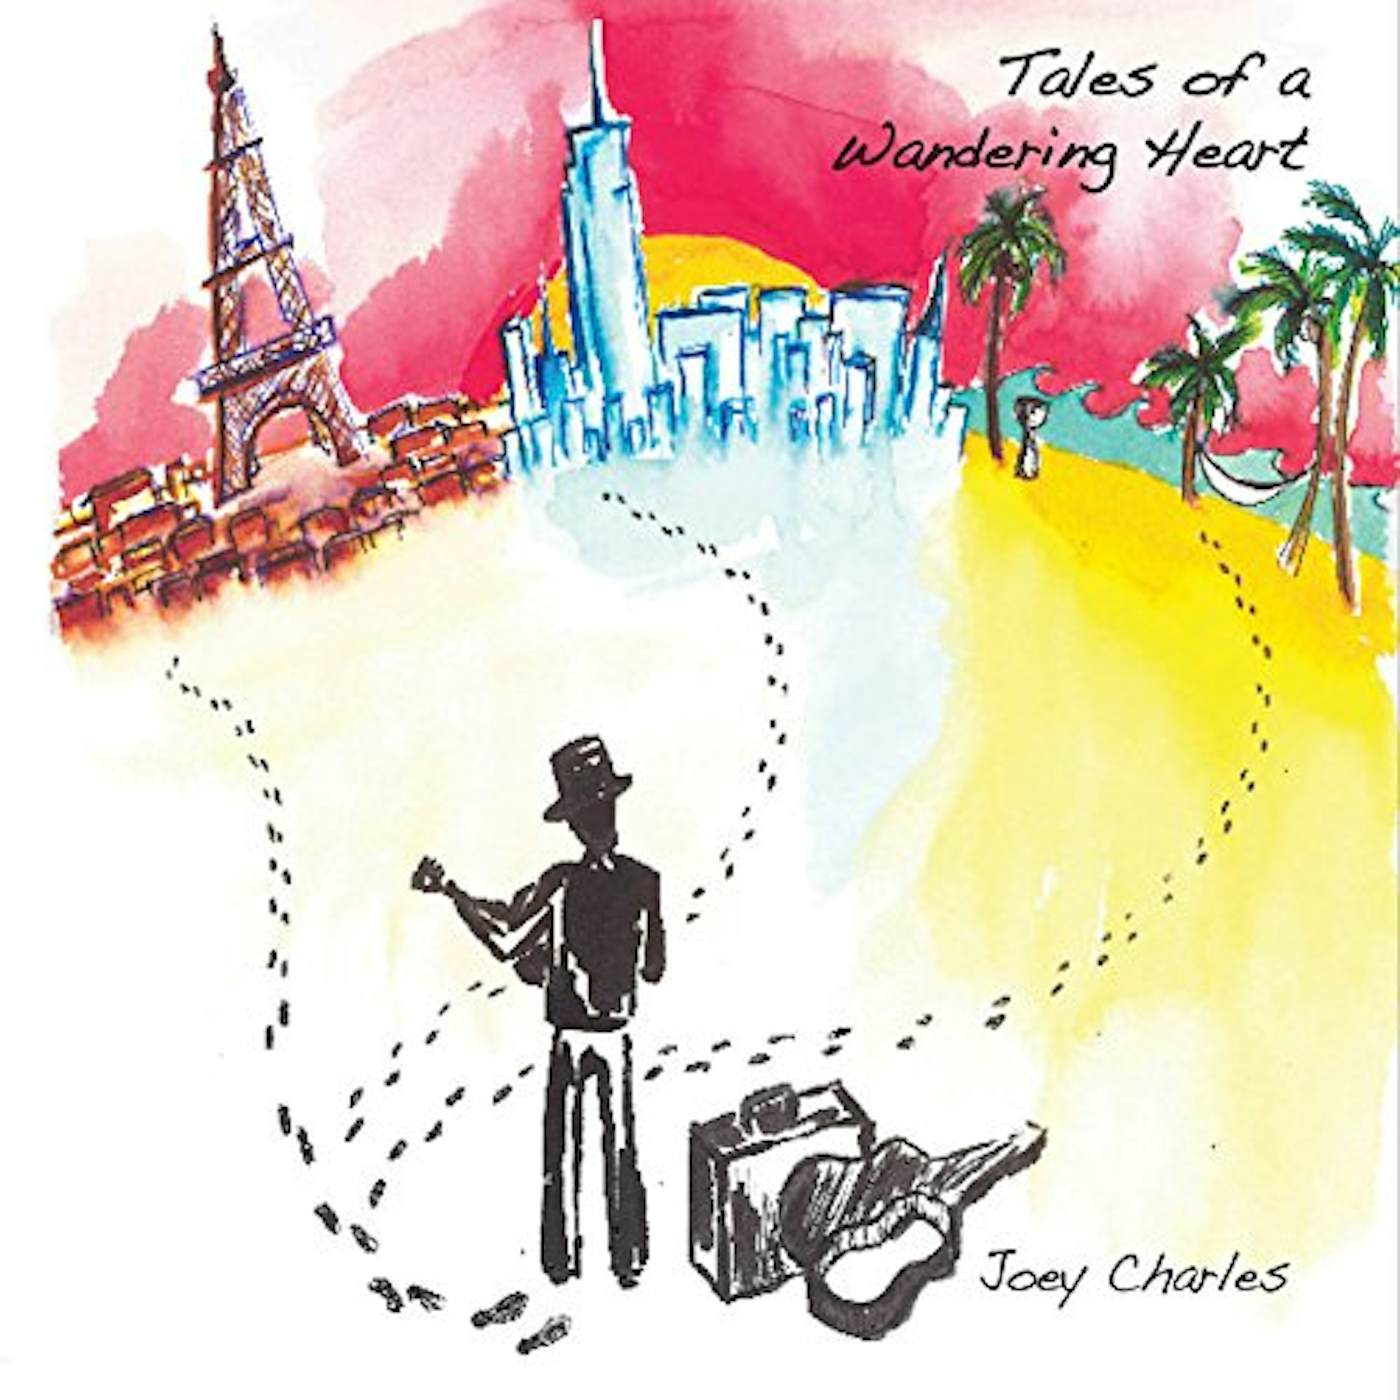 Joey & Charles TALES OF A WANDERING HEART CD